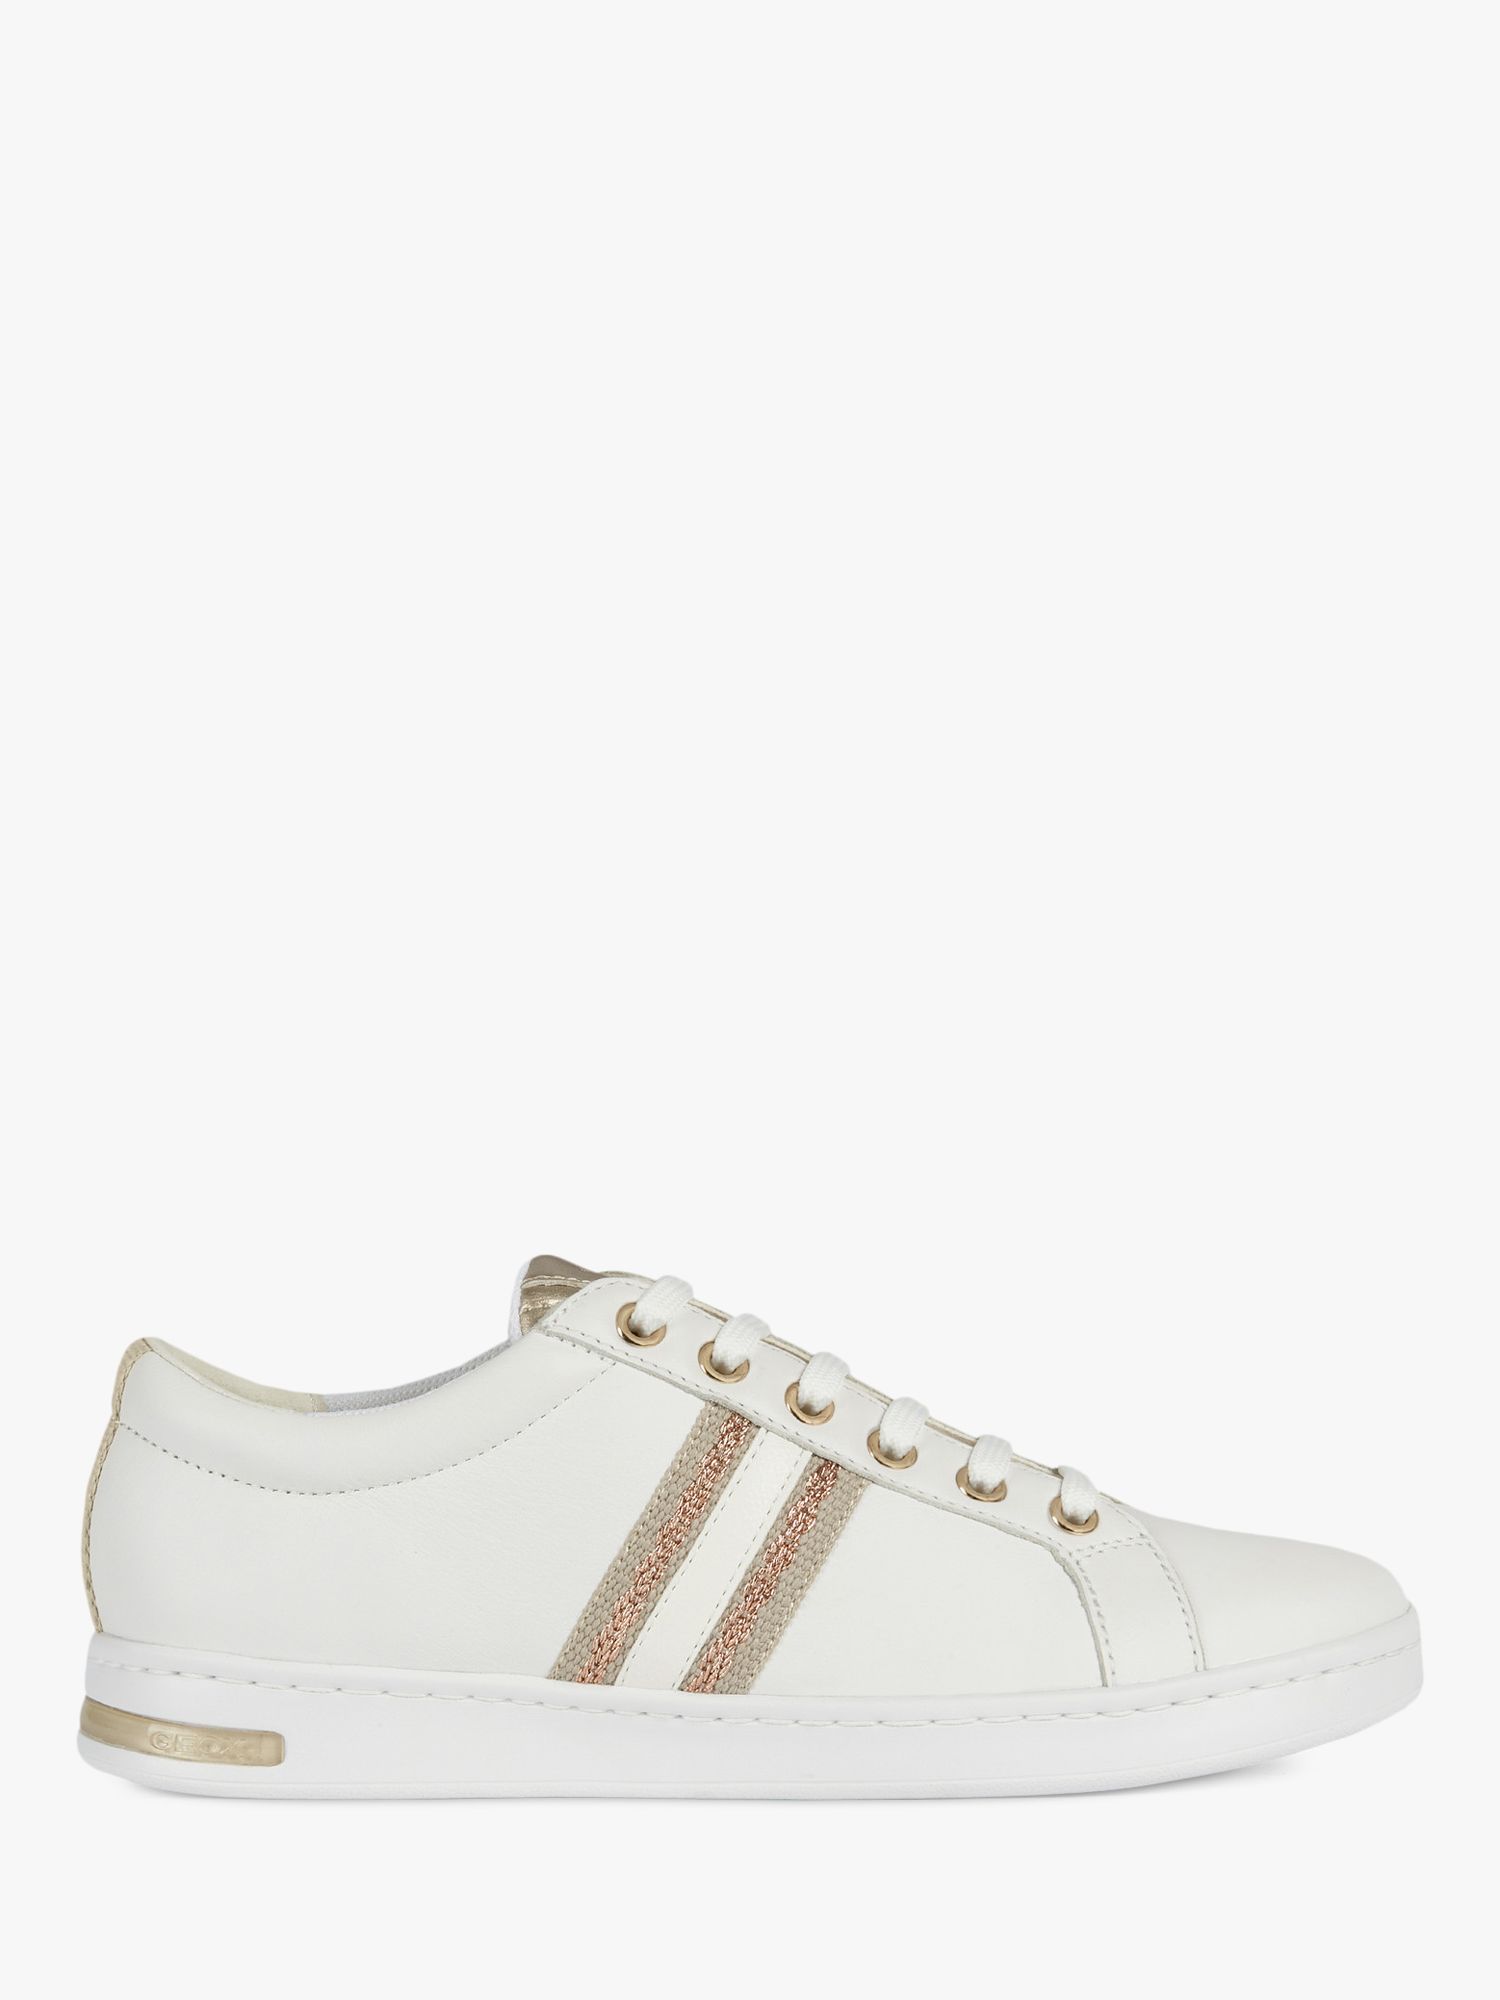 white and rose gold trainers